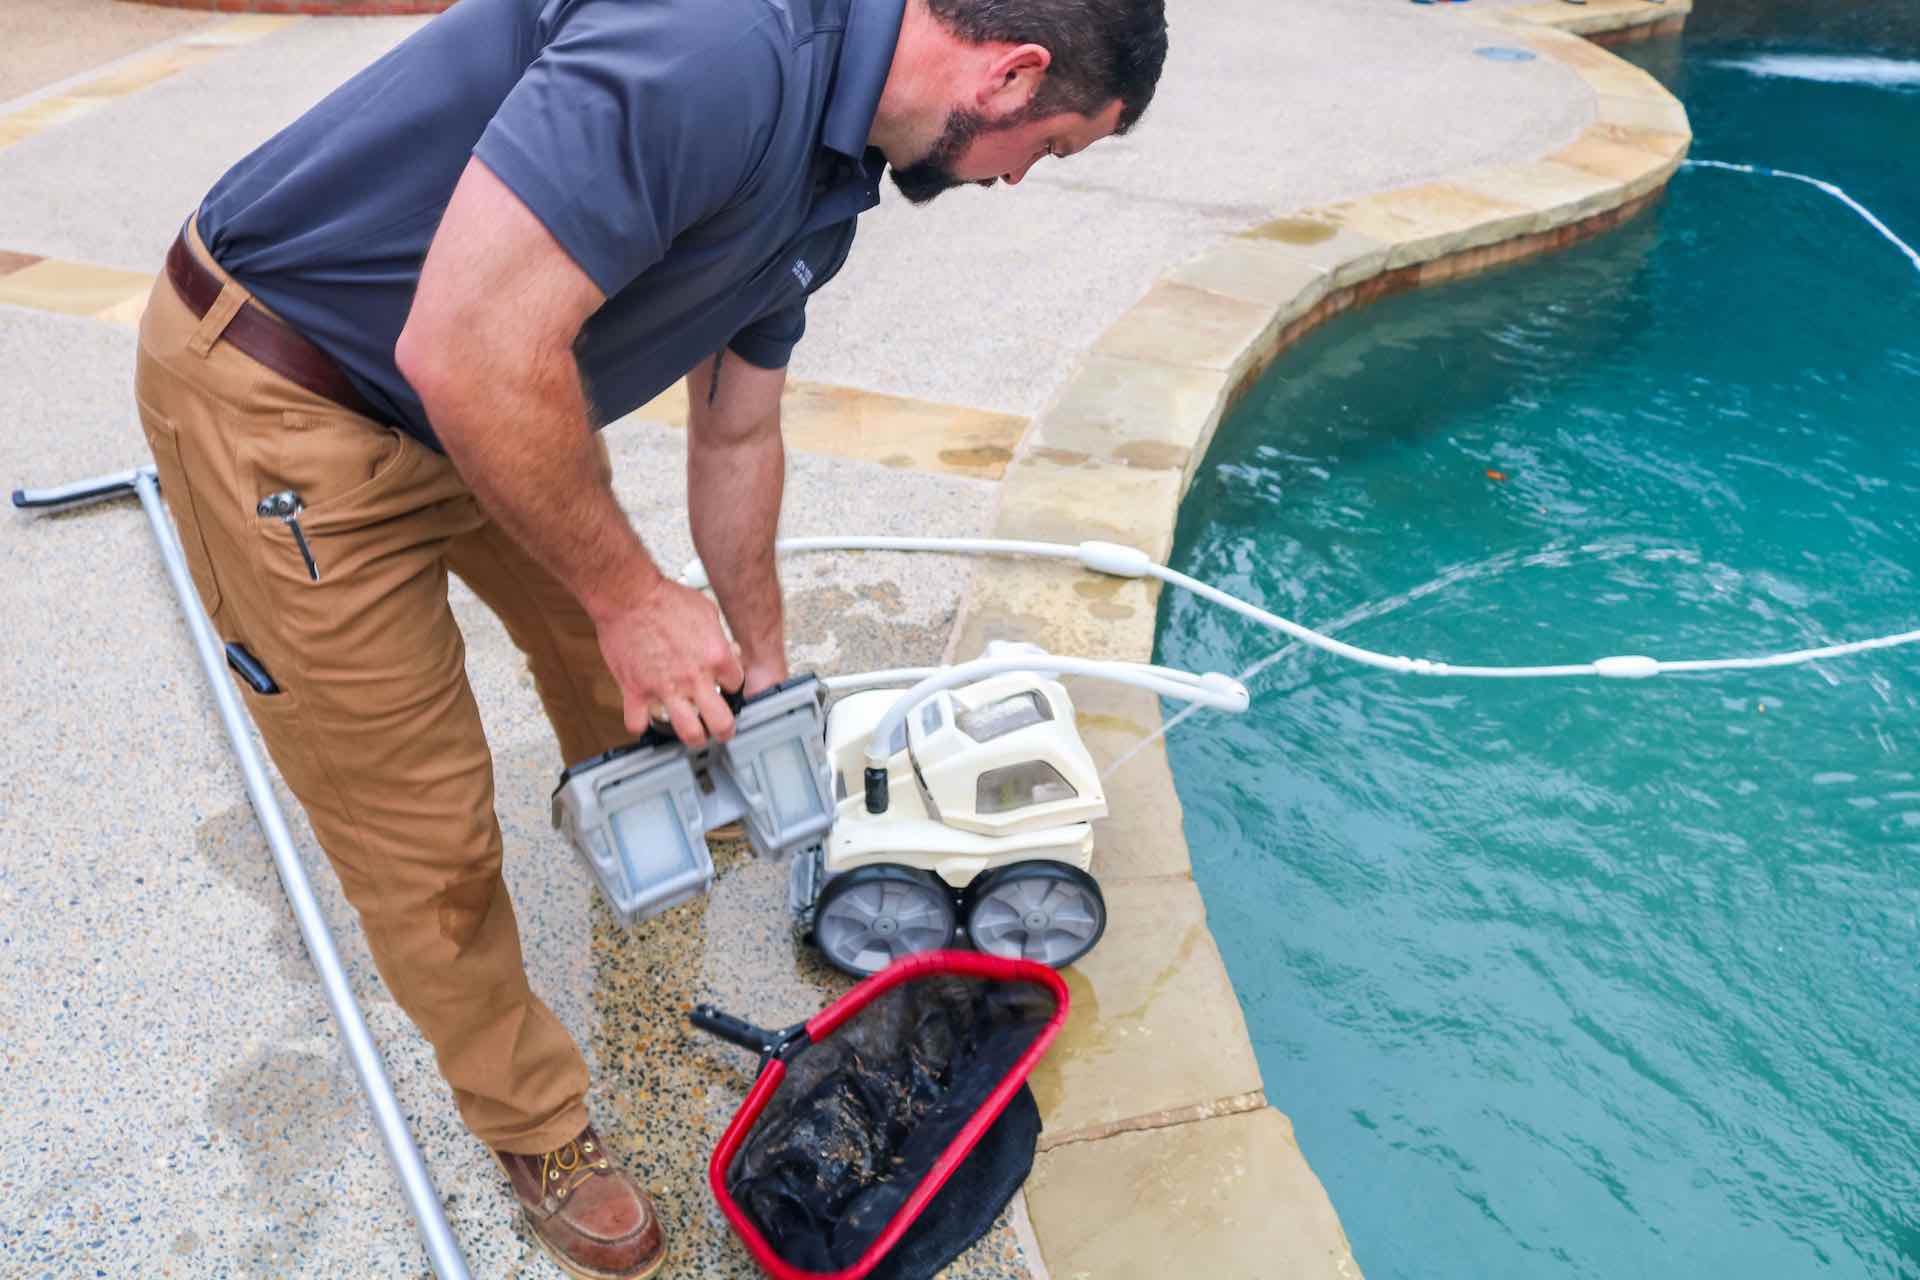 pool cleaning service automatic robot pool cleaner memphis ogden pools